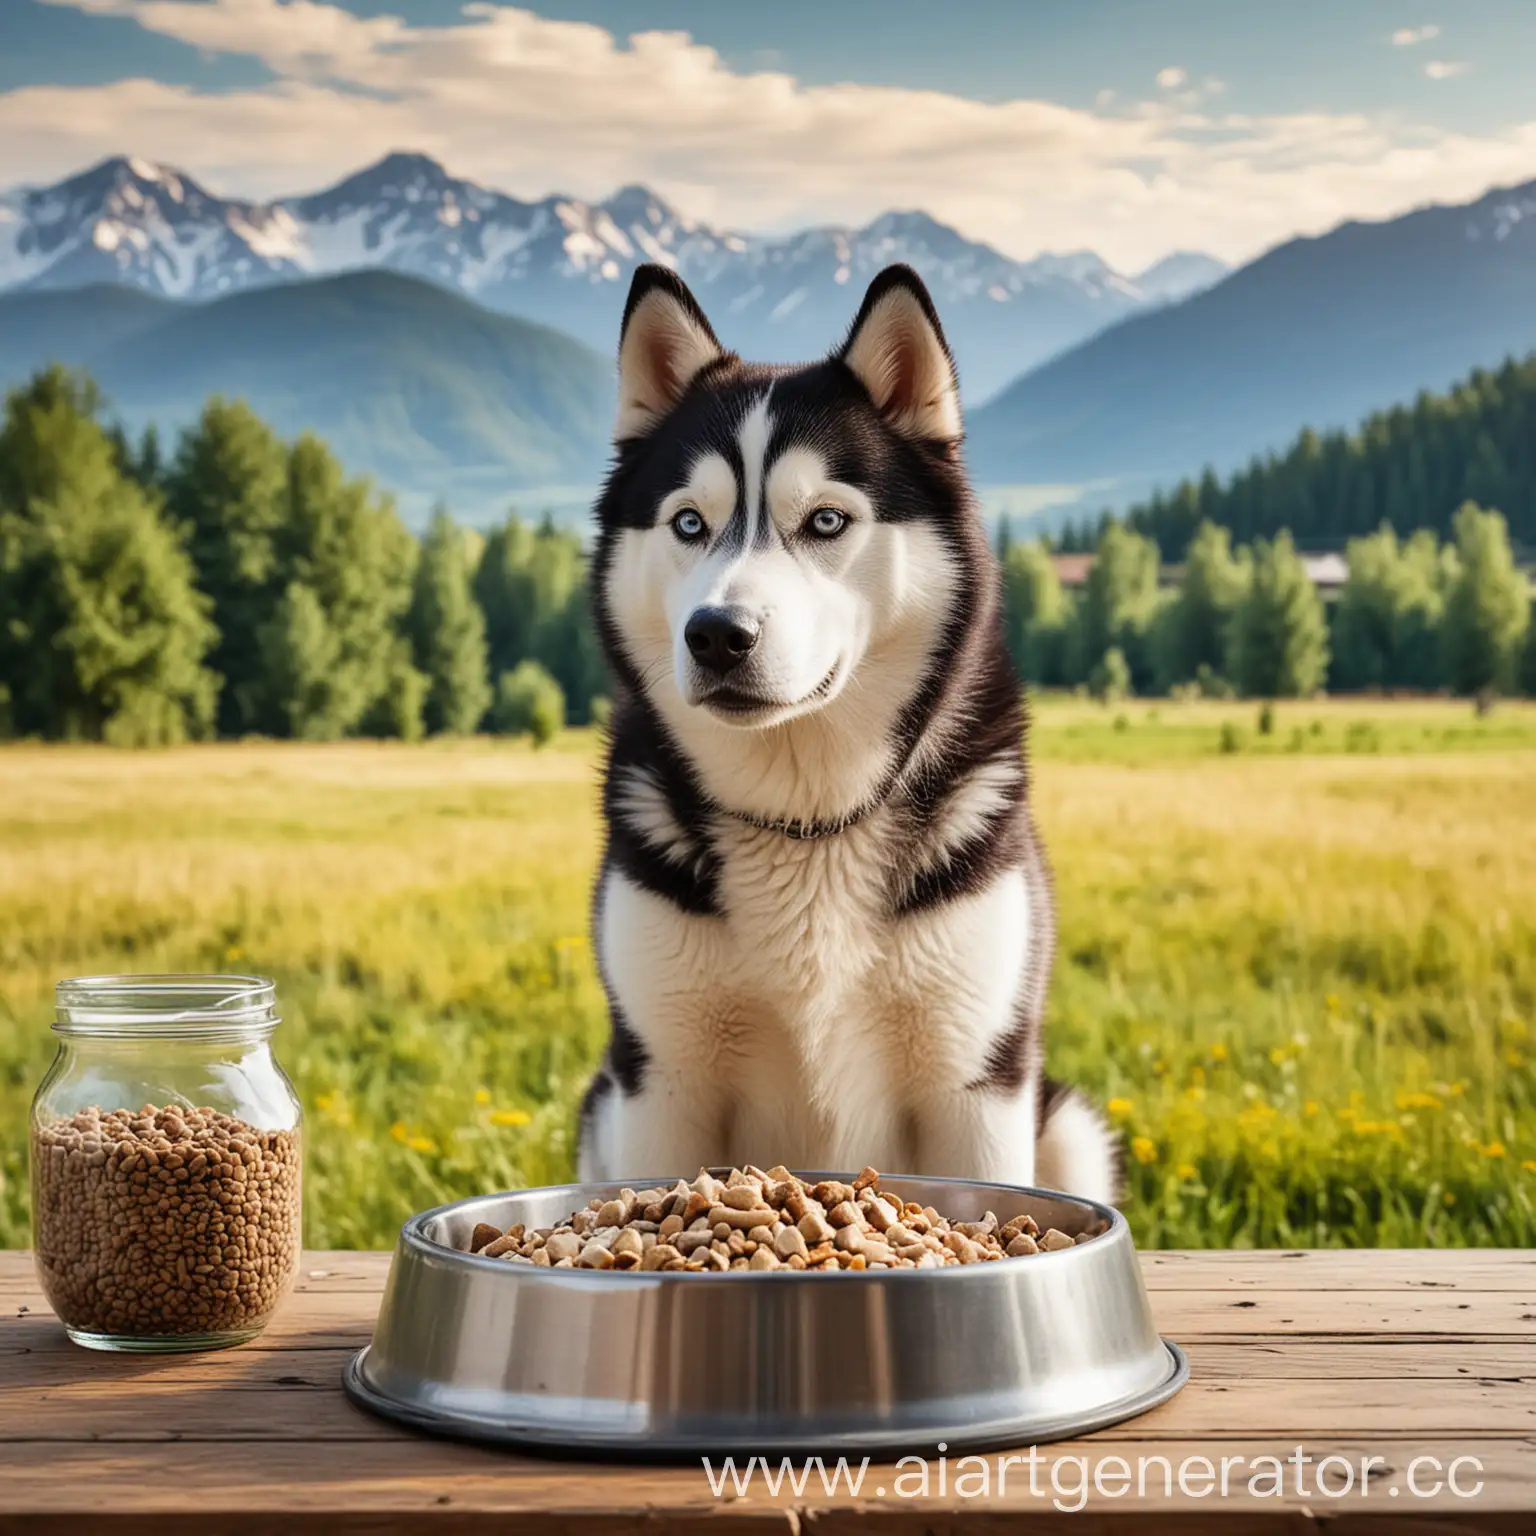 Siberian-Husky-Eating-from-Bowl-on-Table-with-Mountain-Meadow-Background